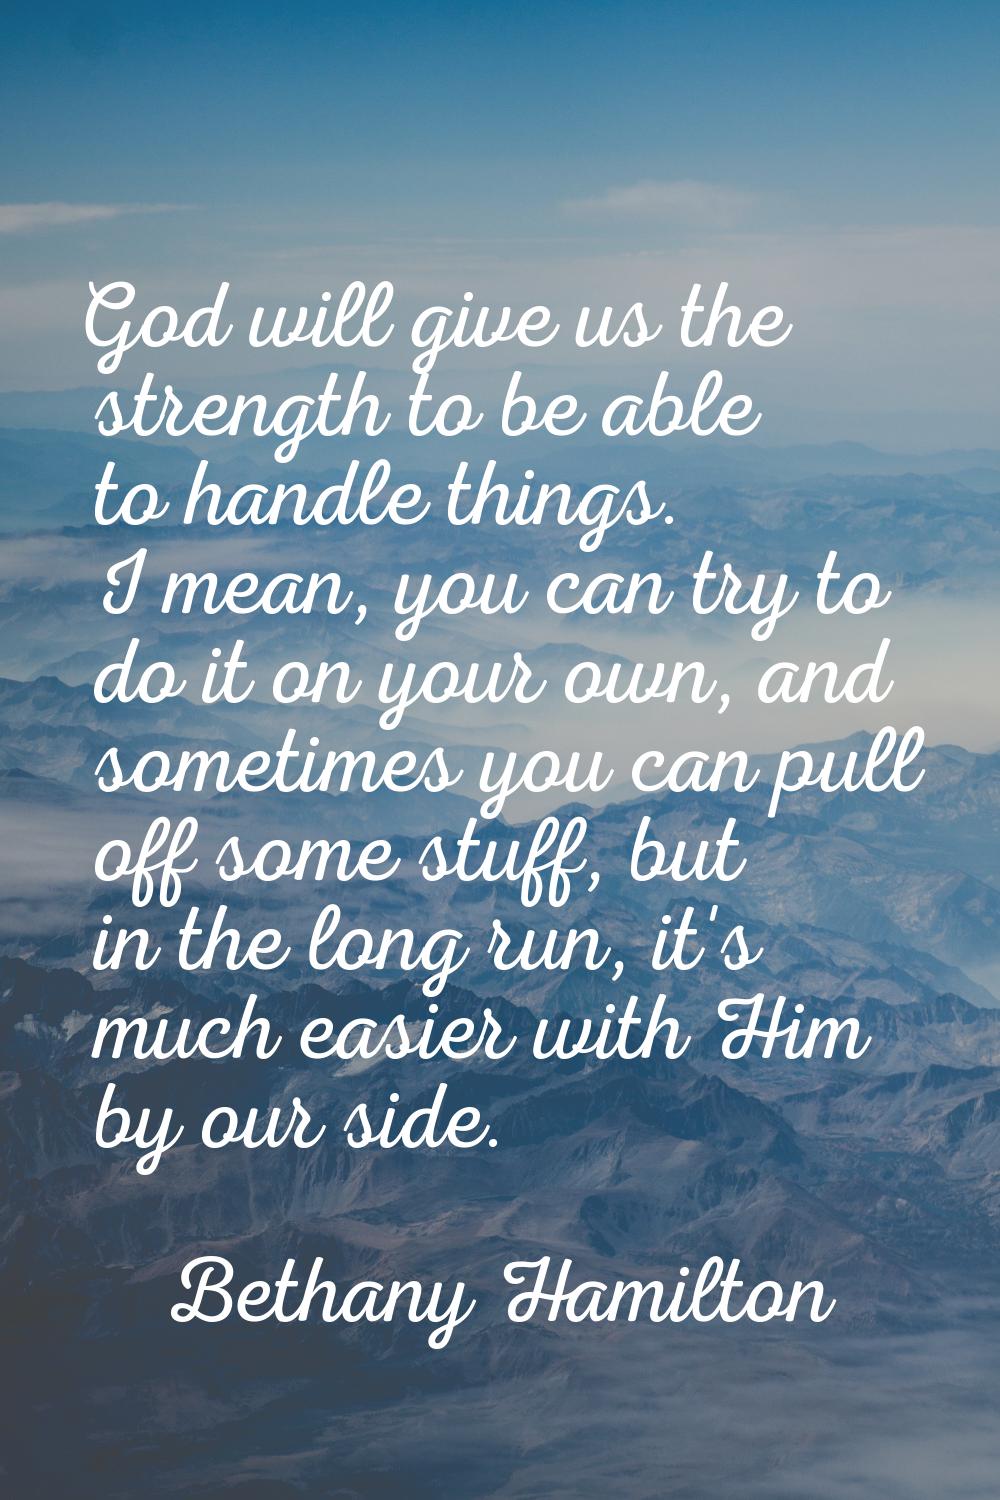 God will give us the strength to be able to handle things. I mean, you can try to do it on your own